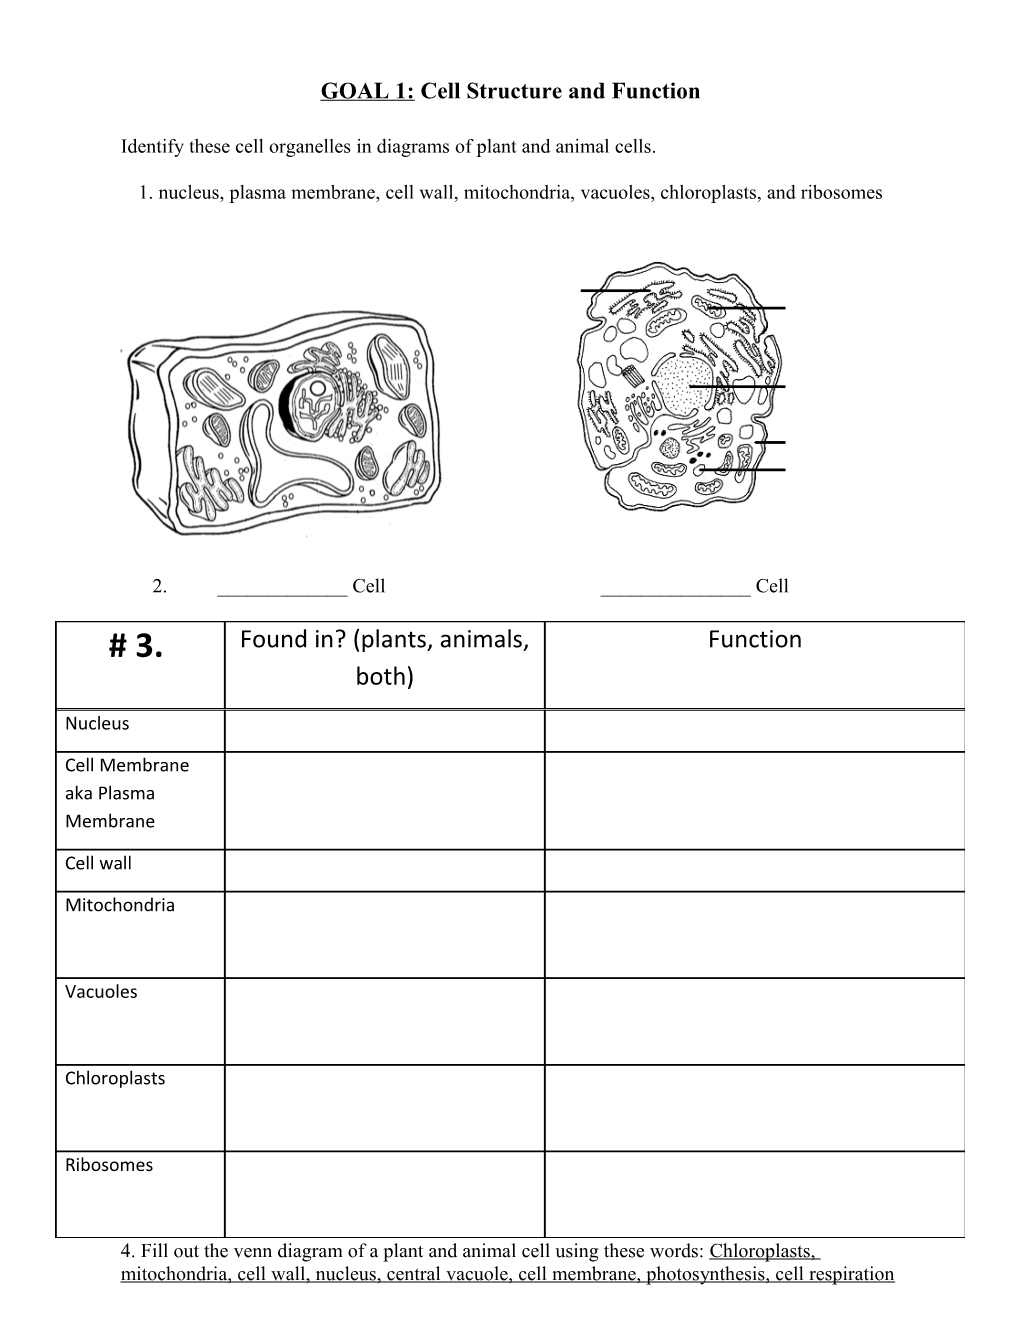 Structures and Functions of Living Organisms s1